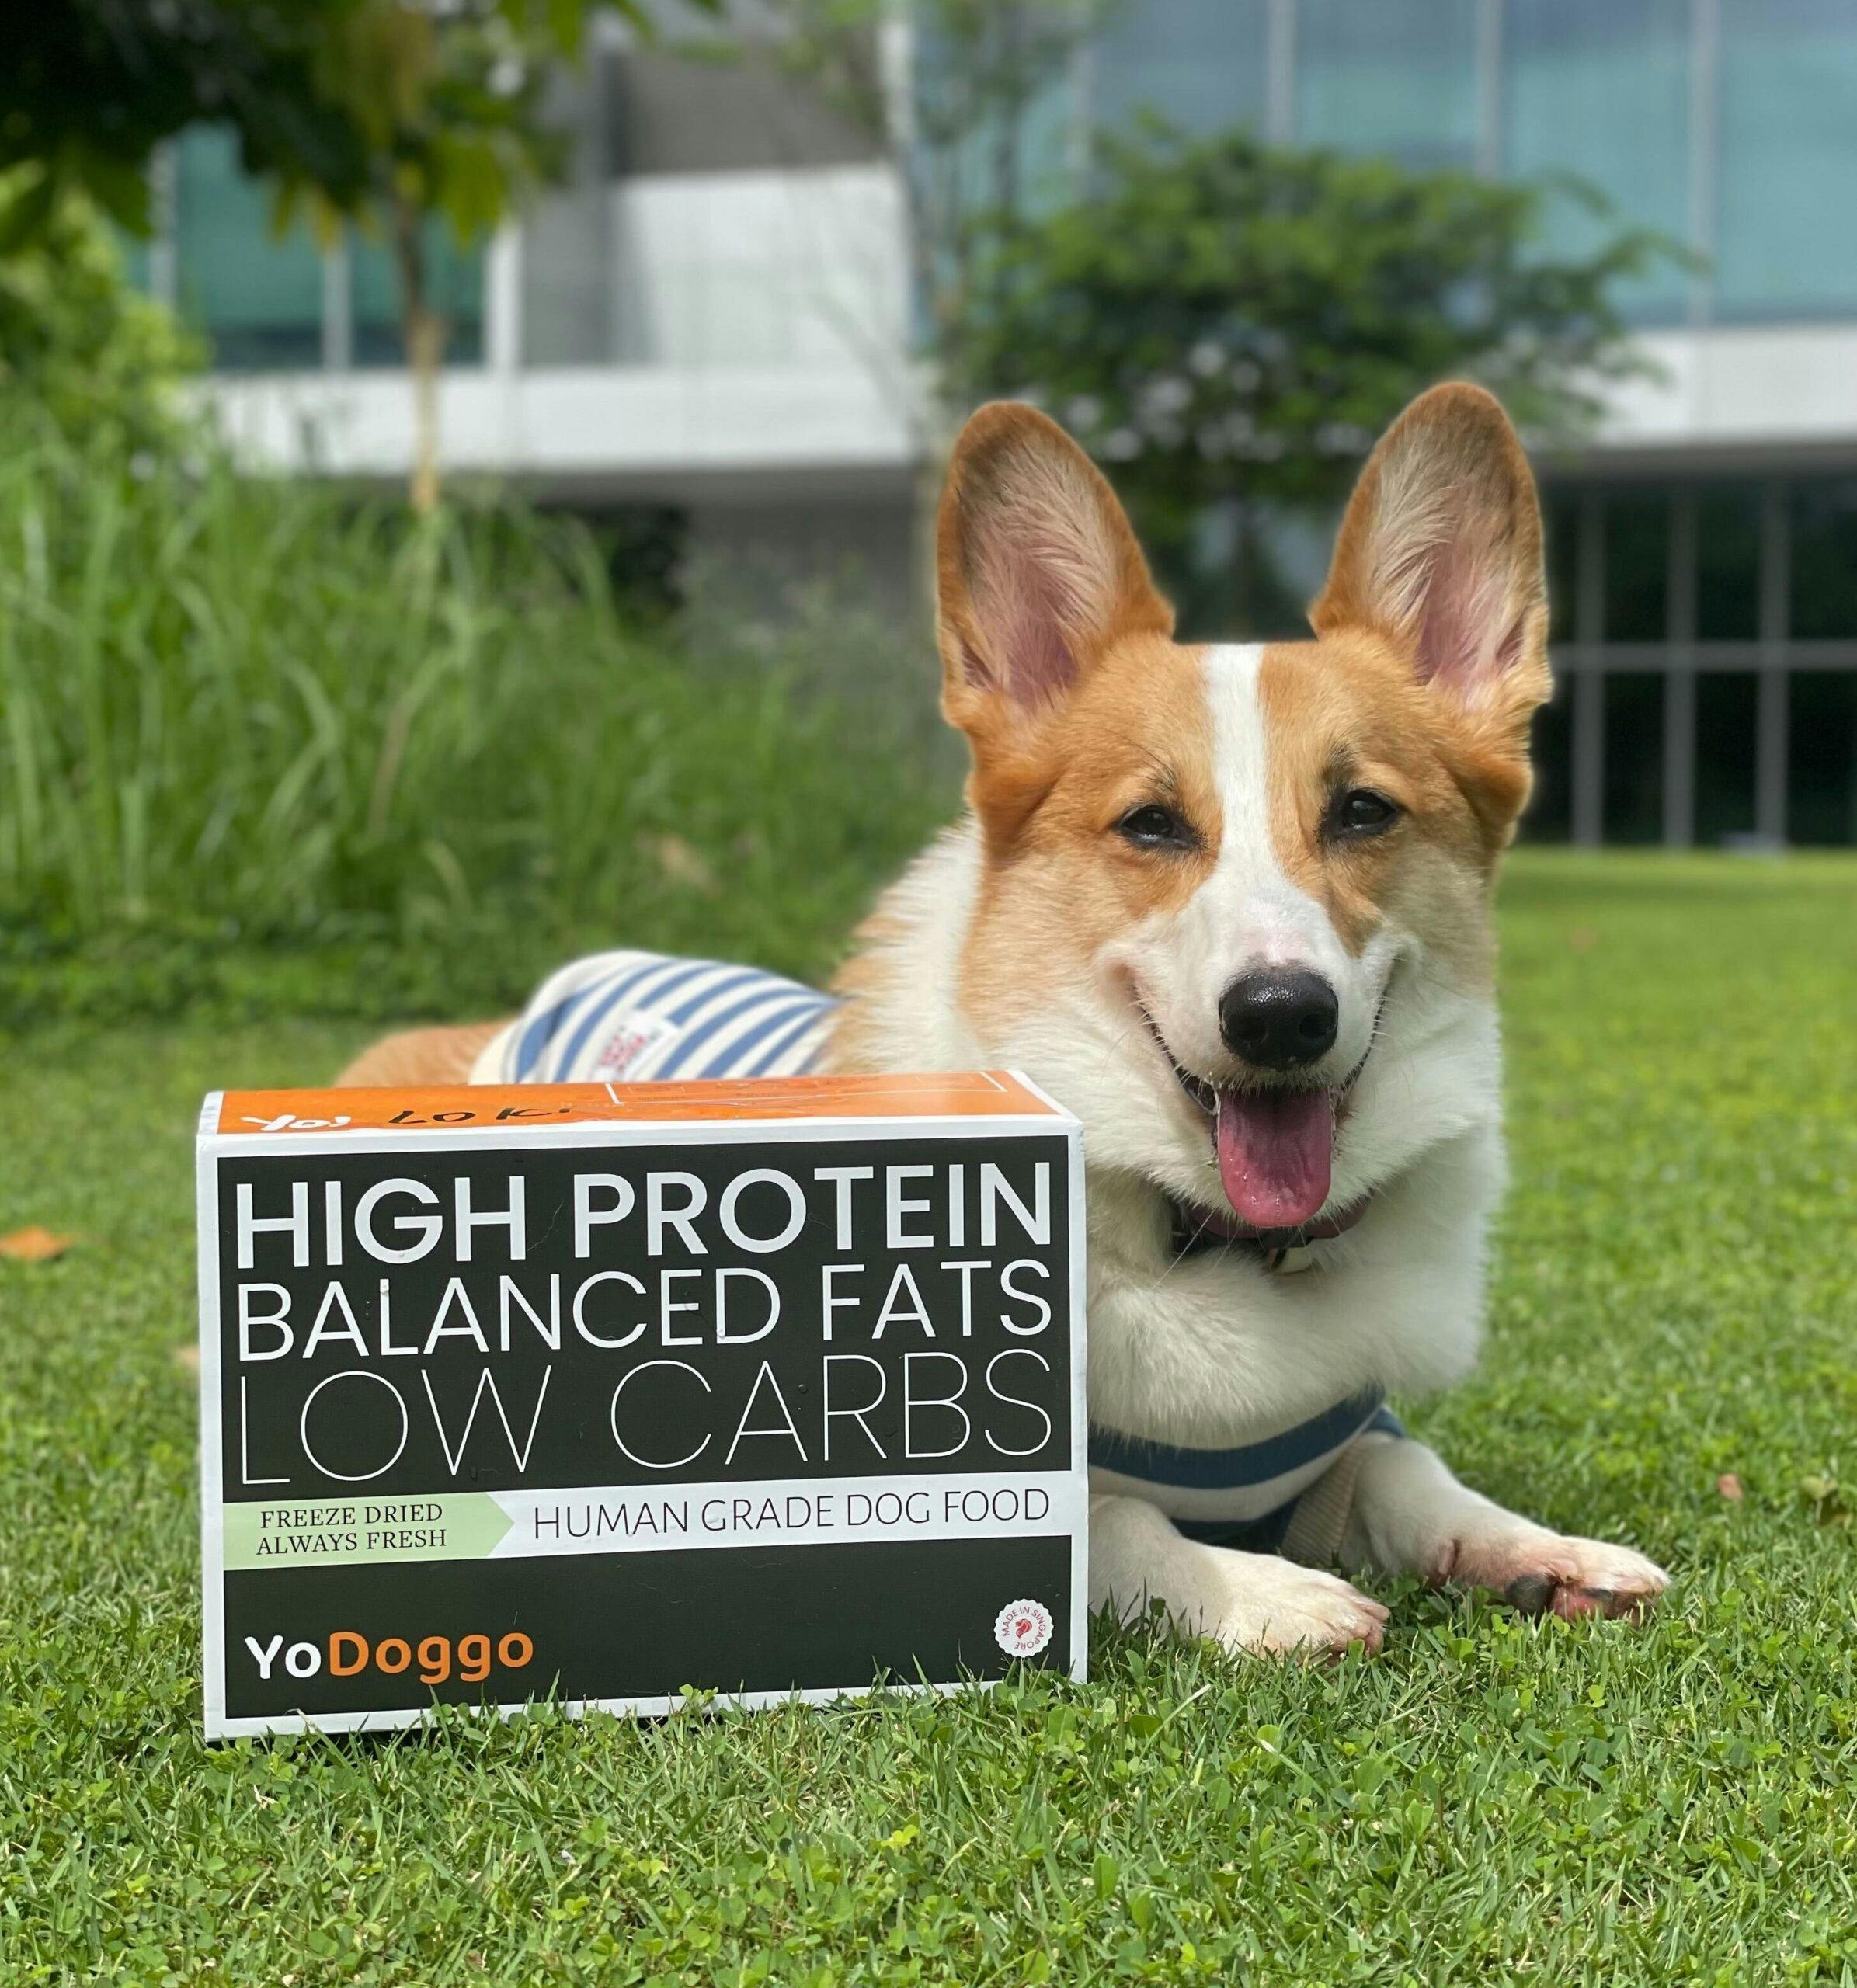 We tried Singapore’s first gently cooked & freeze-dried dog food, here’s how it went!